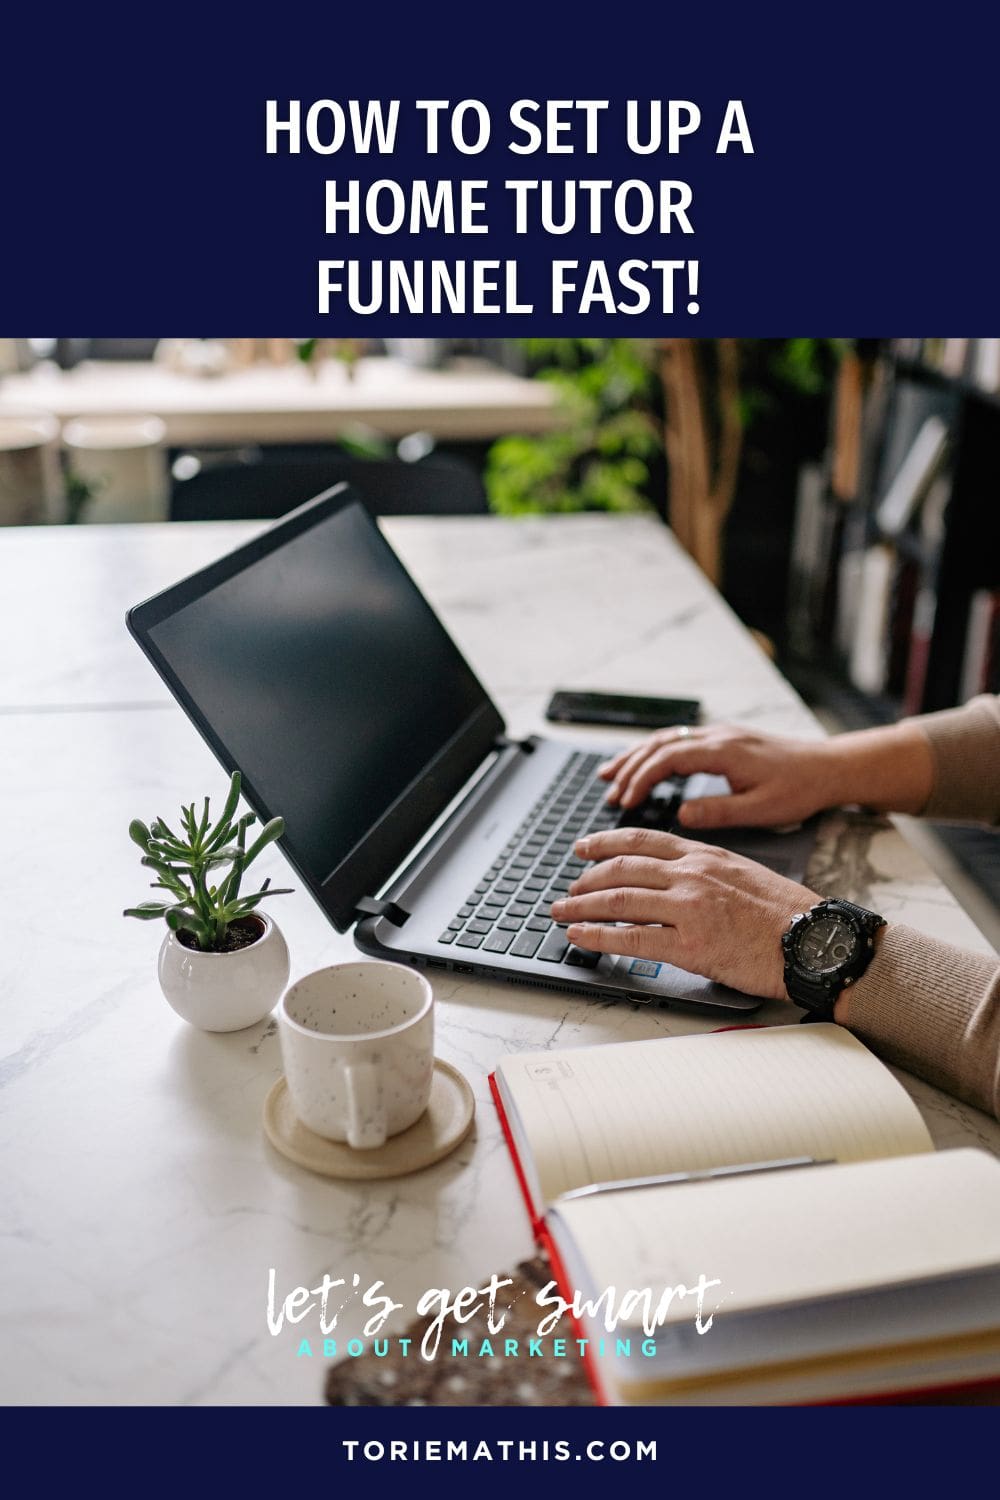 Home Tutor Funnel Template